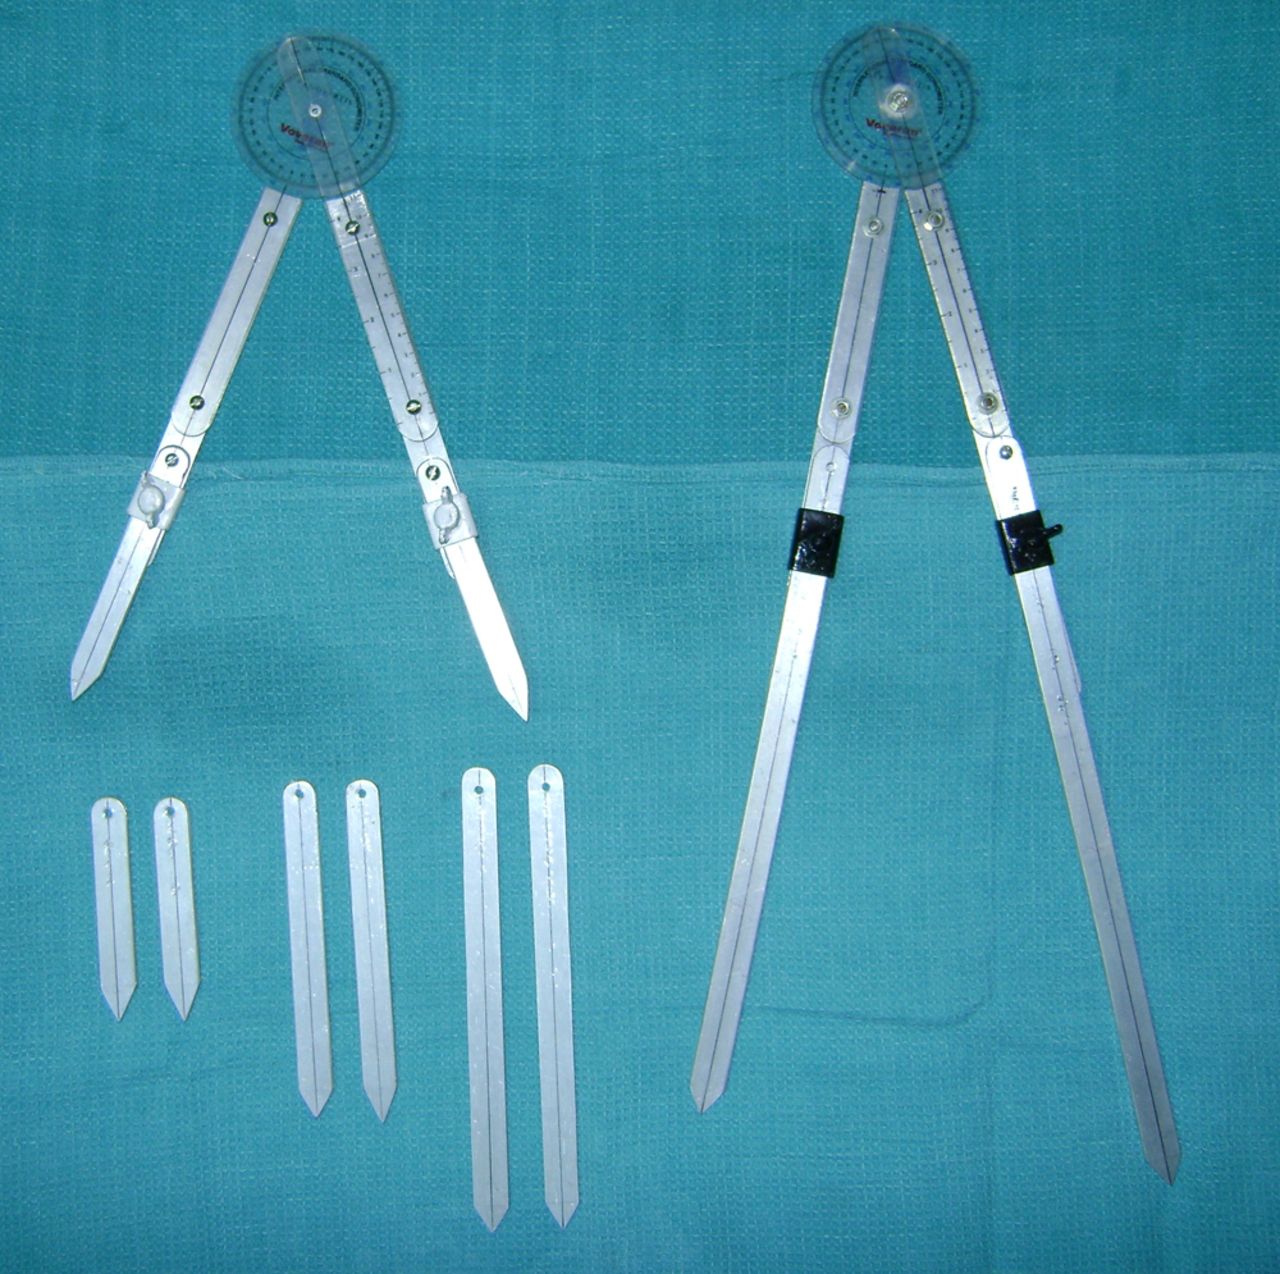 Fig. 3 
          Photograph showing the customised standardised
goniometers with expandable arms.
        